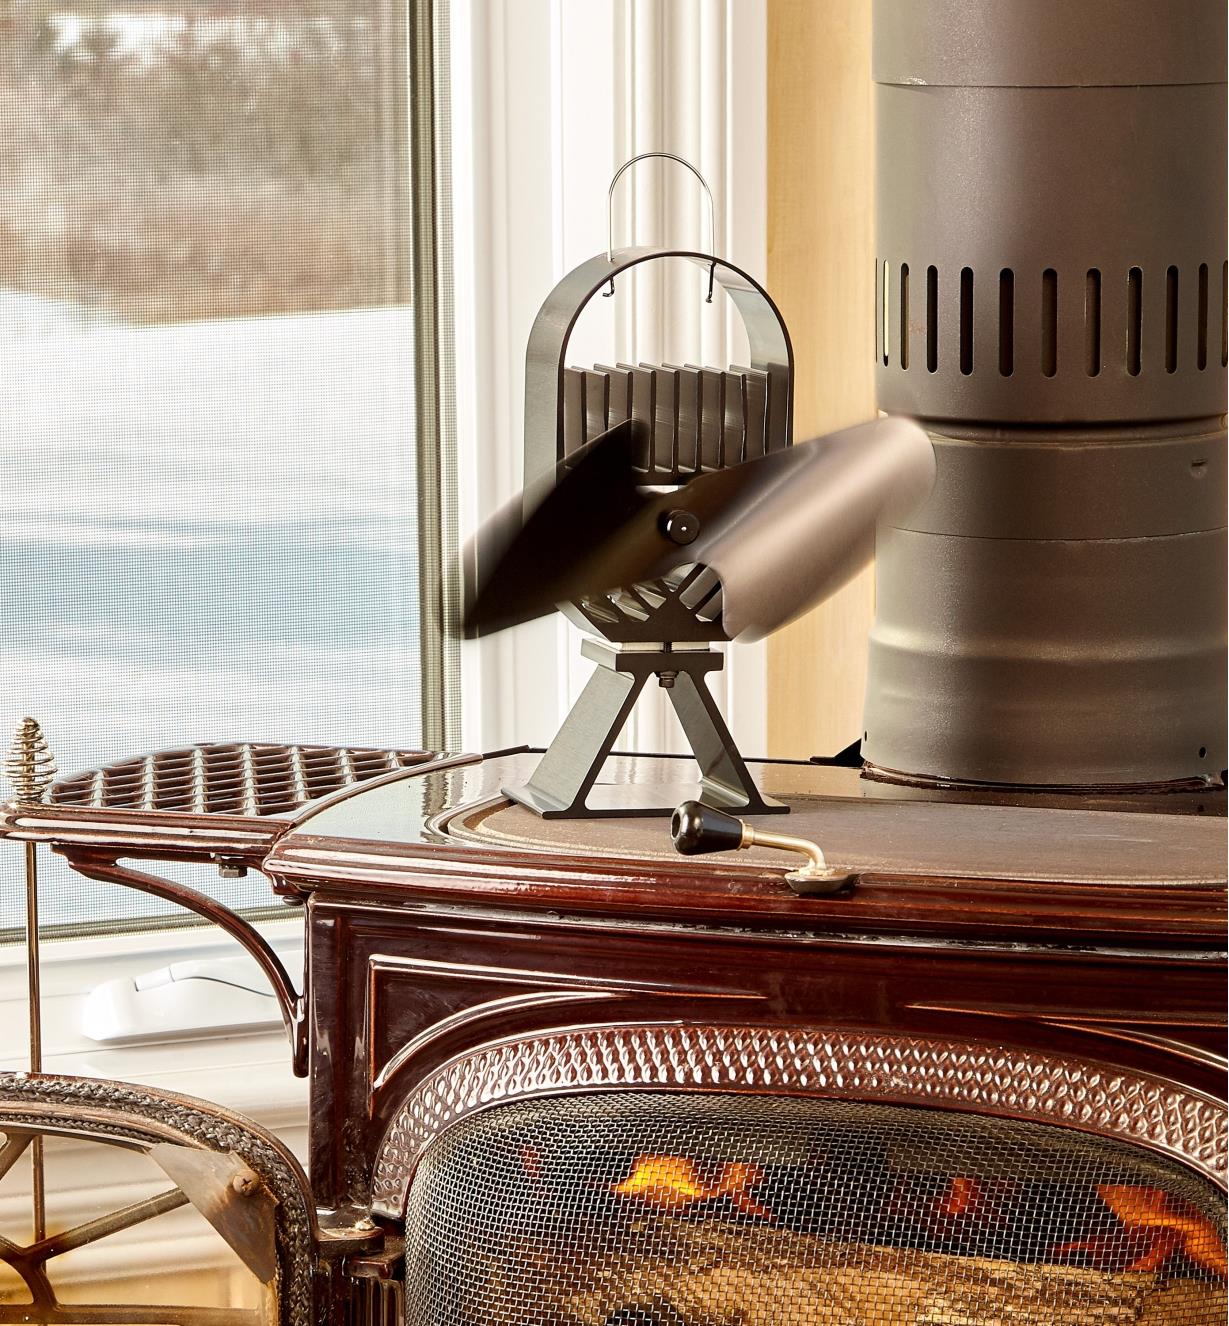 Large Ecofan AirDeco on a wood stove, distributing the heat of the fire